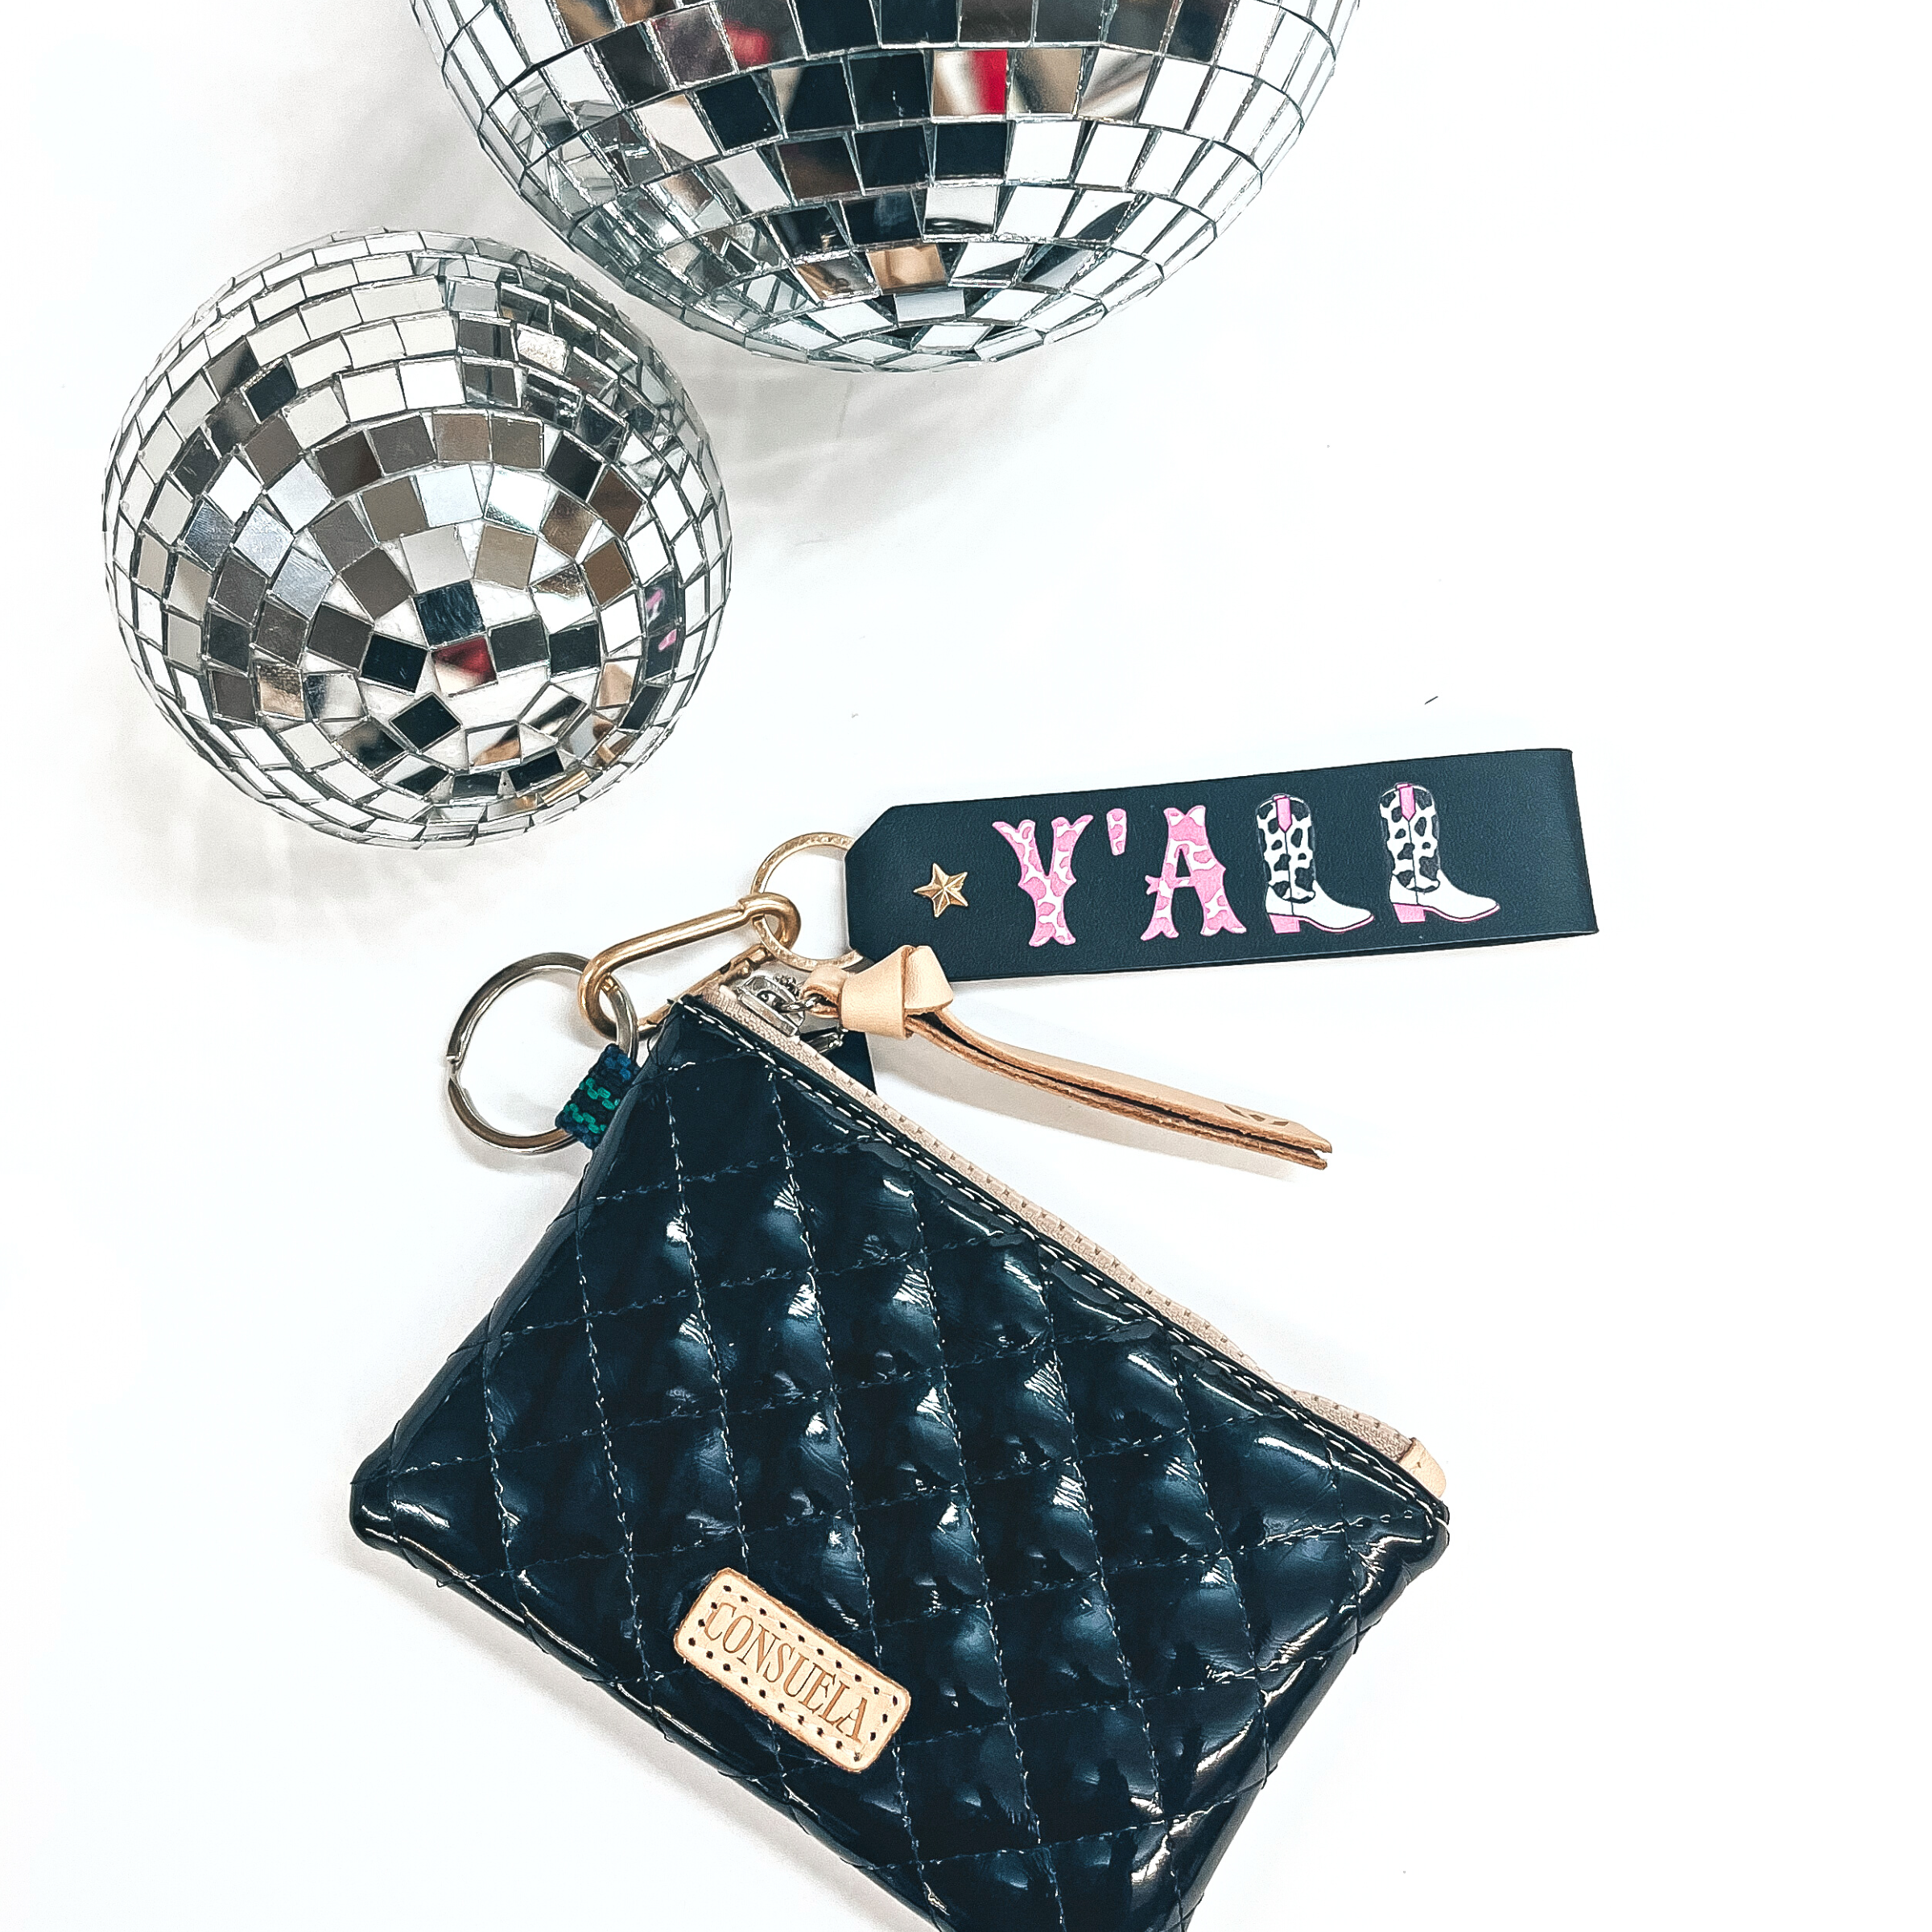 This is a black leather keychain with a matte gold key ring and a star.  It says, 'Y'ALL', with pink and white cow print inside the letters, there is  also two boots as L's. The boots have black and white cow print with pink  detailing. This keychain is connected to a black shiny Consuela pouch and on a  white background with two disco balls in the back as decor.